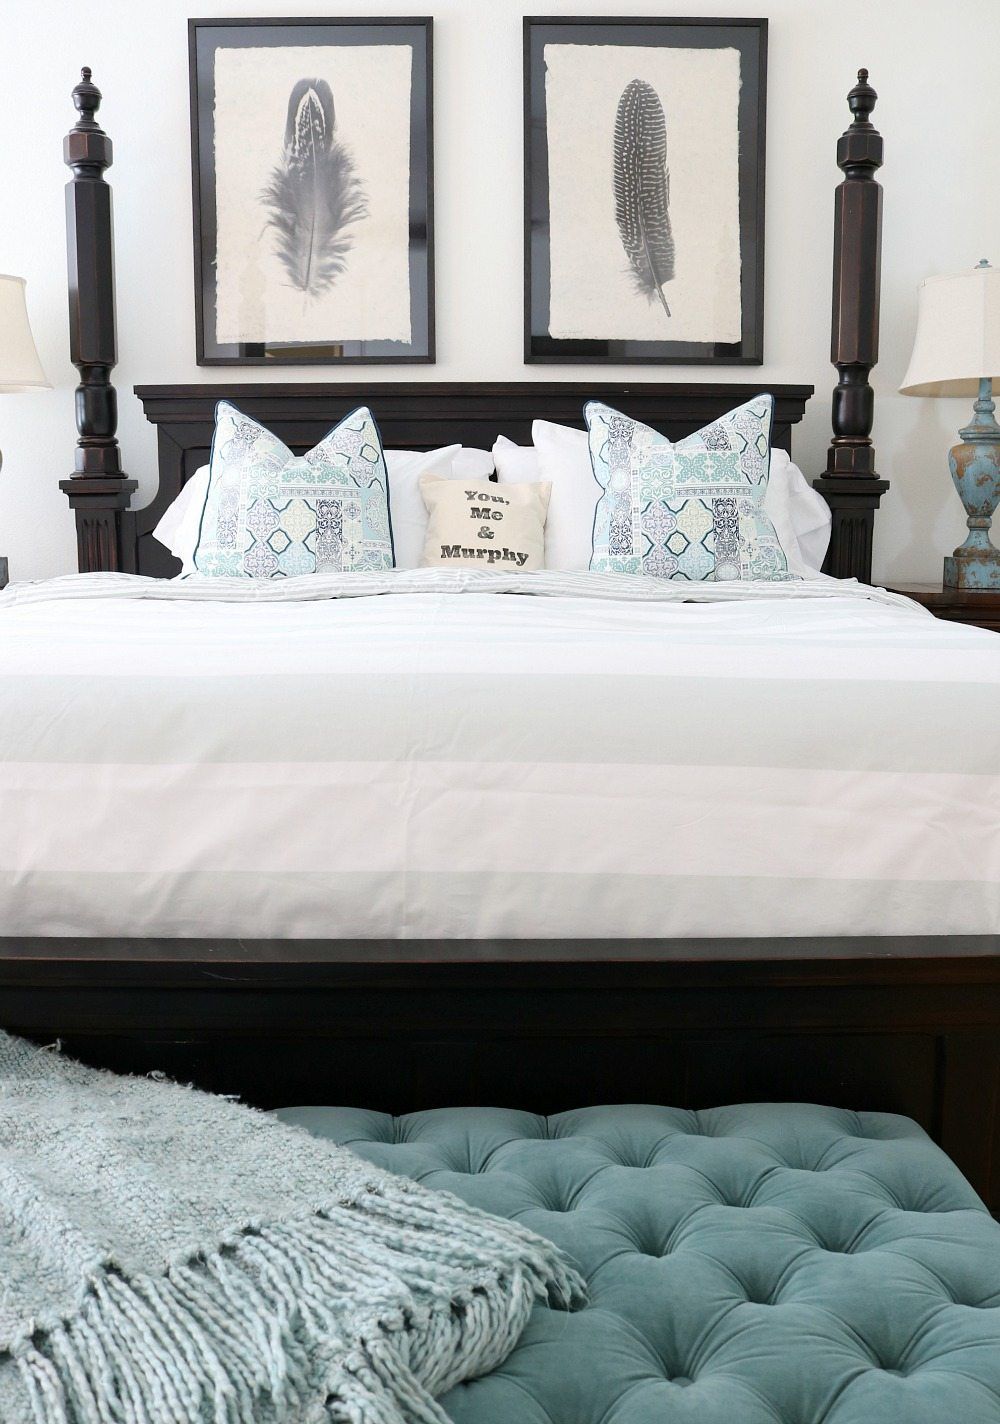 Feather prints are perfect for the farmhouse bedroom